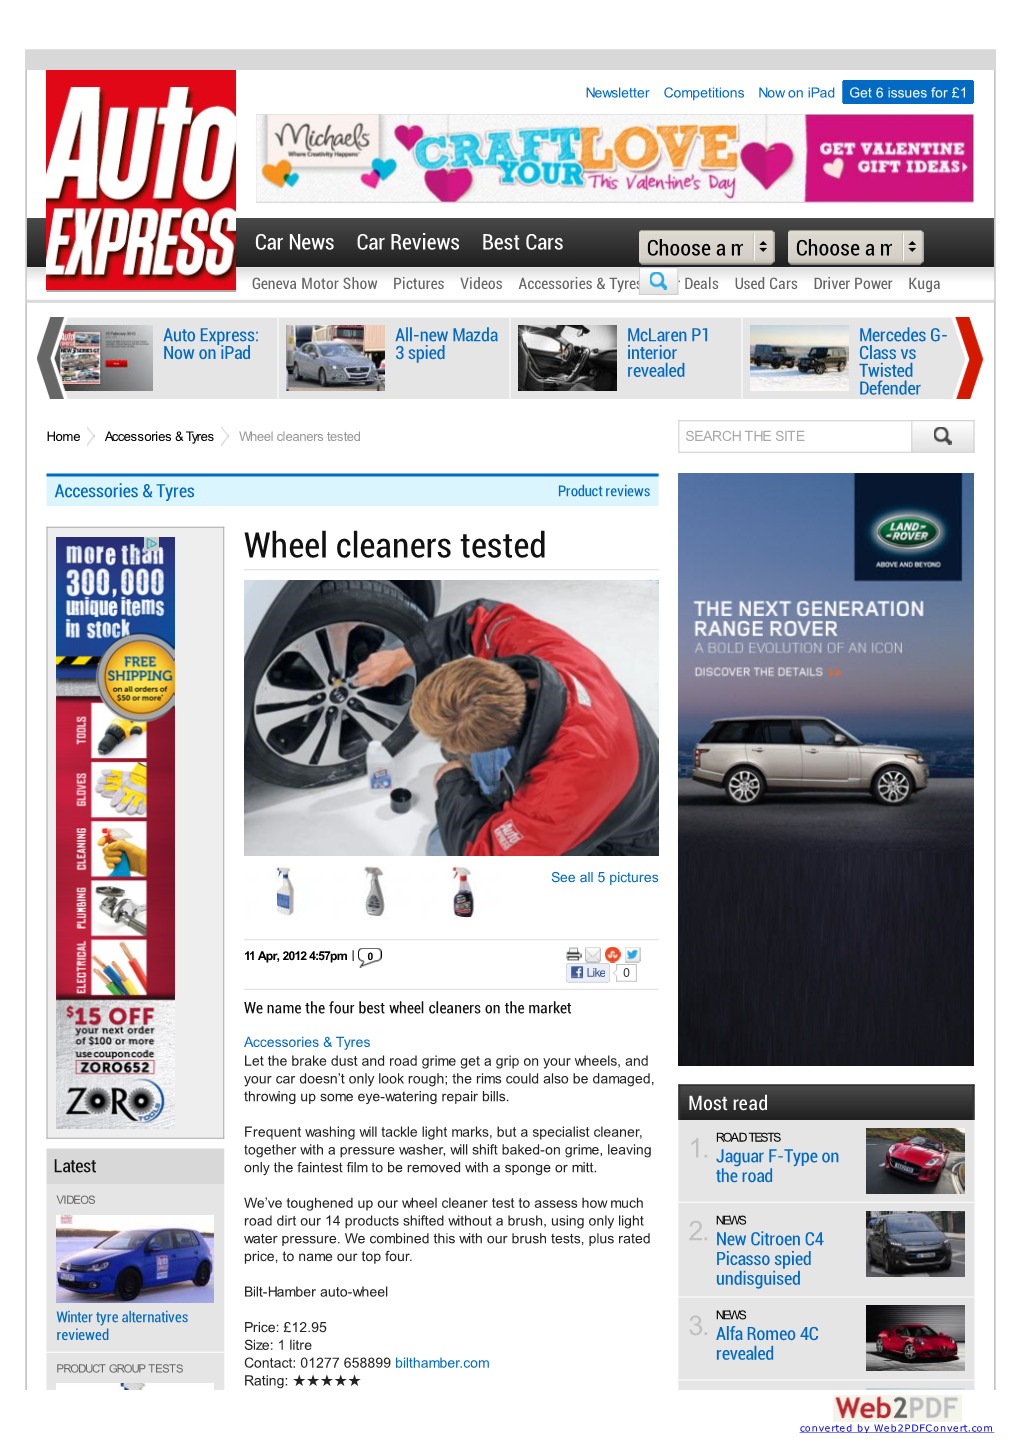 Auto Express: All-New Mazda Mclaren P1 Mercedes G- Now on Ipad 3 Spied Interior Class Vs Revealed Twisted Defender